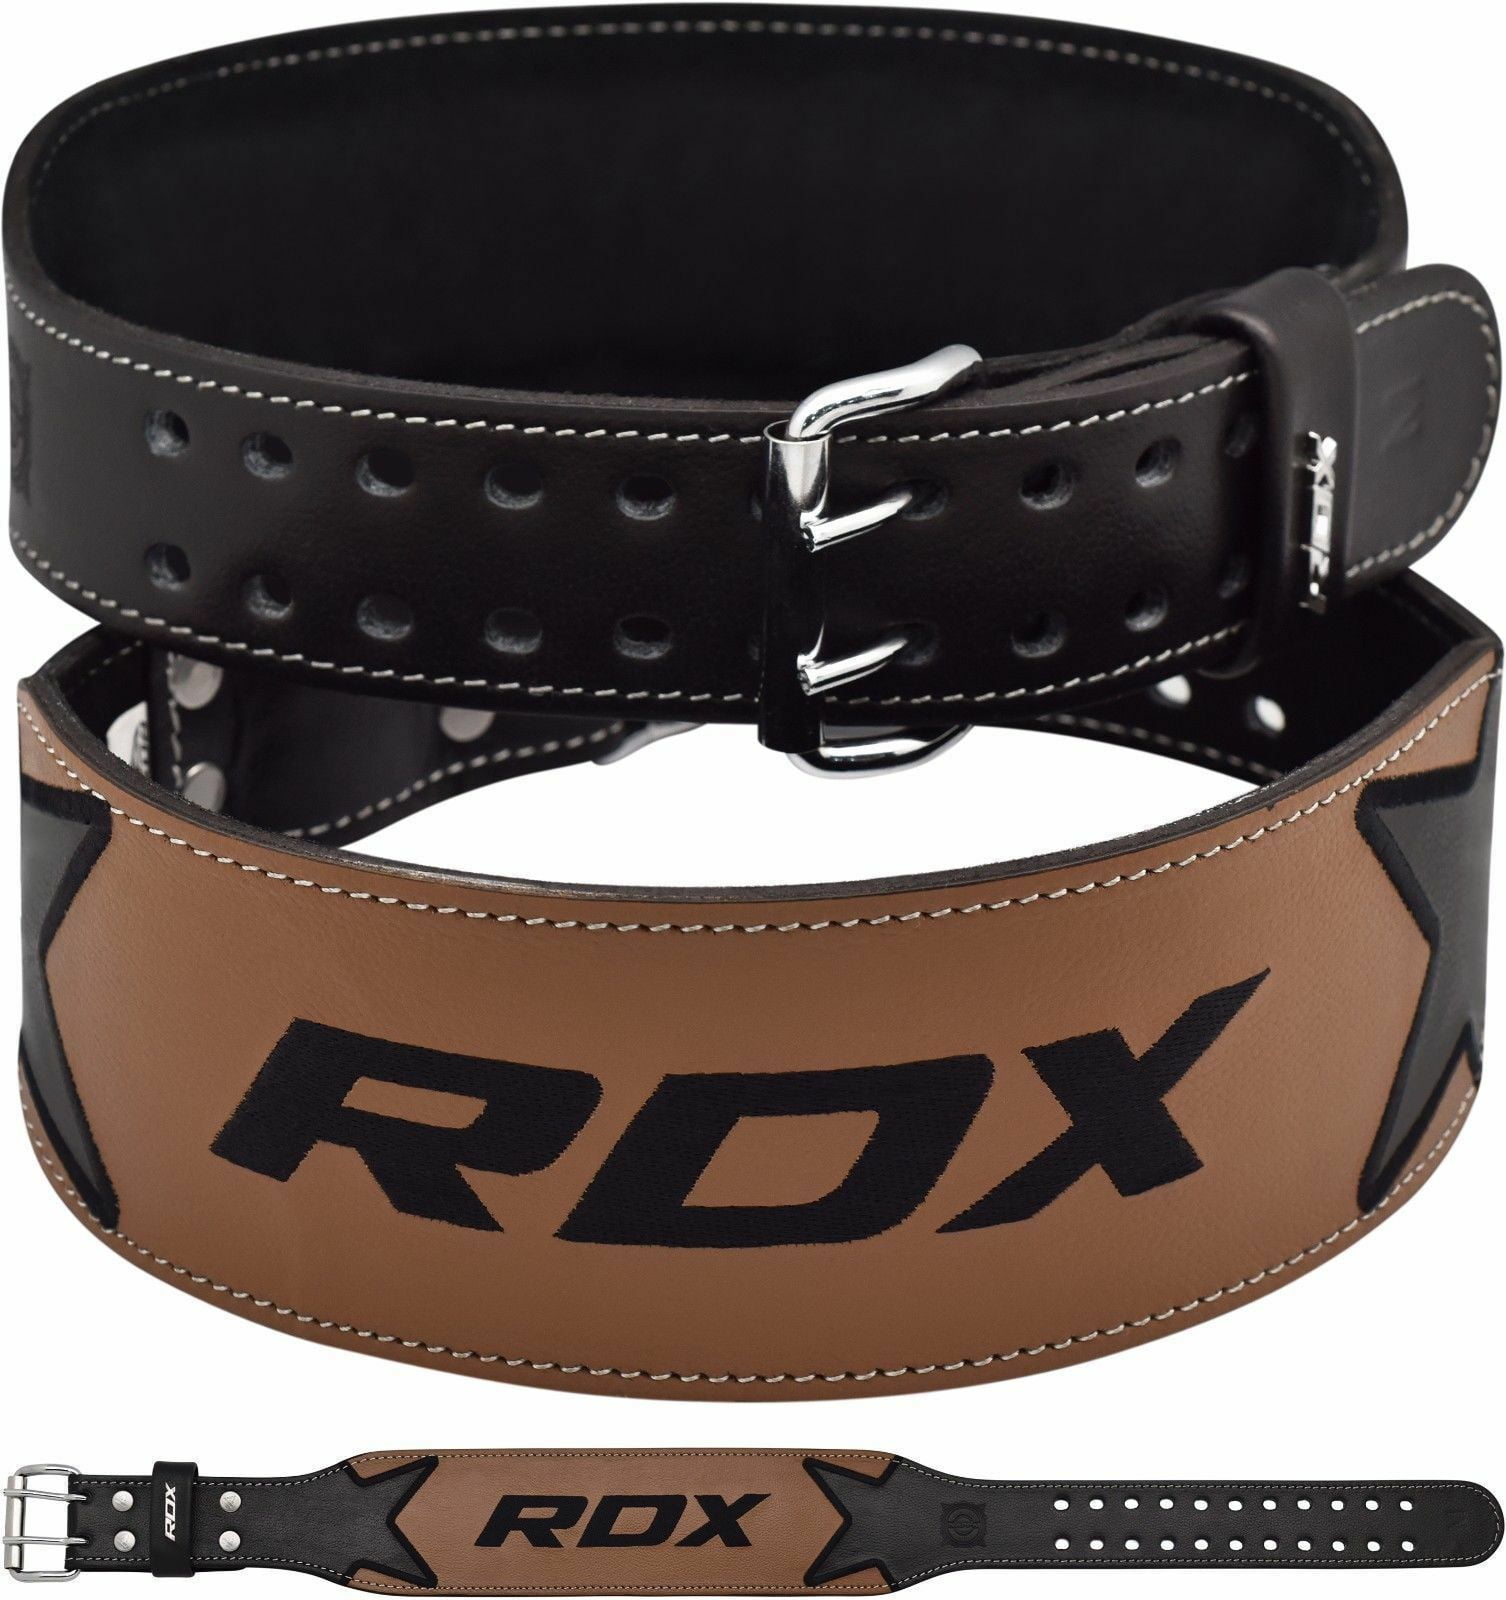 RDX Weight Lifting Belt Leather Bodybuilding Training Workout Back Support